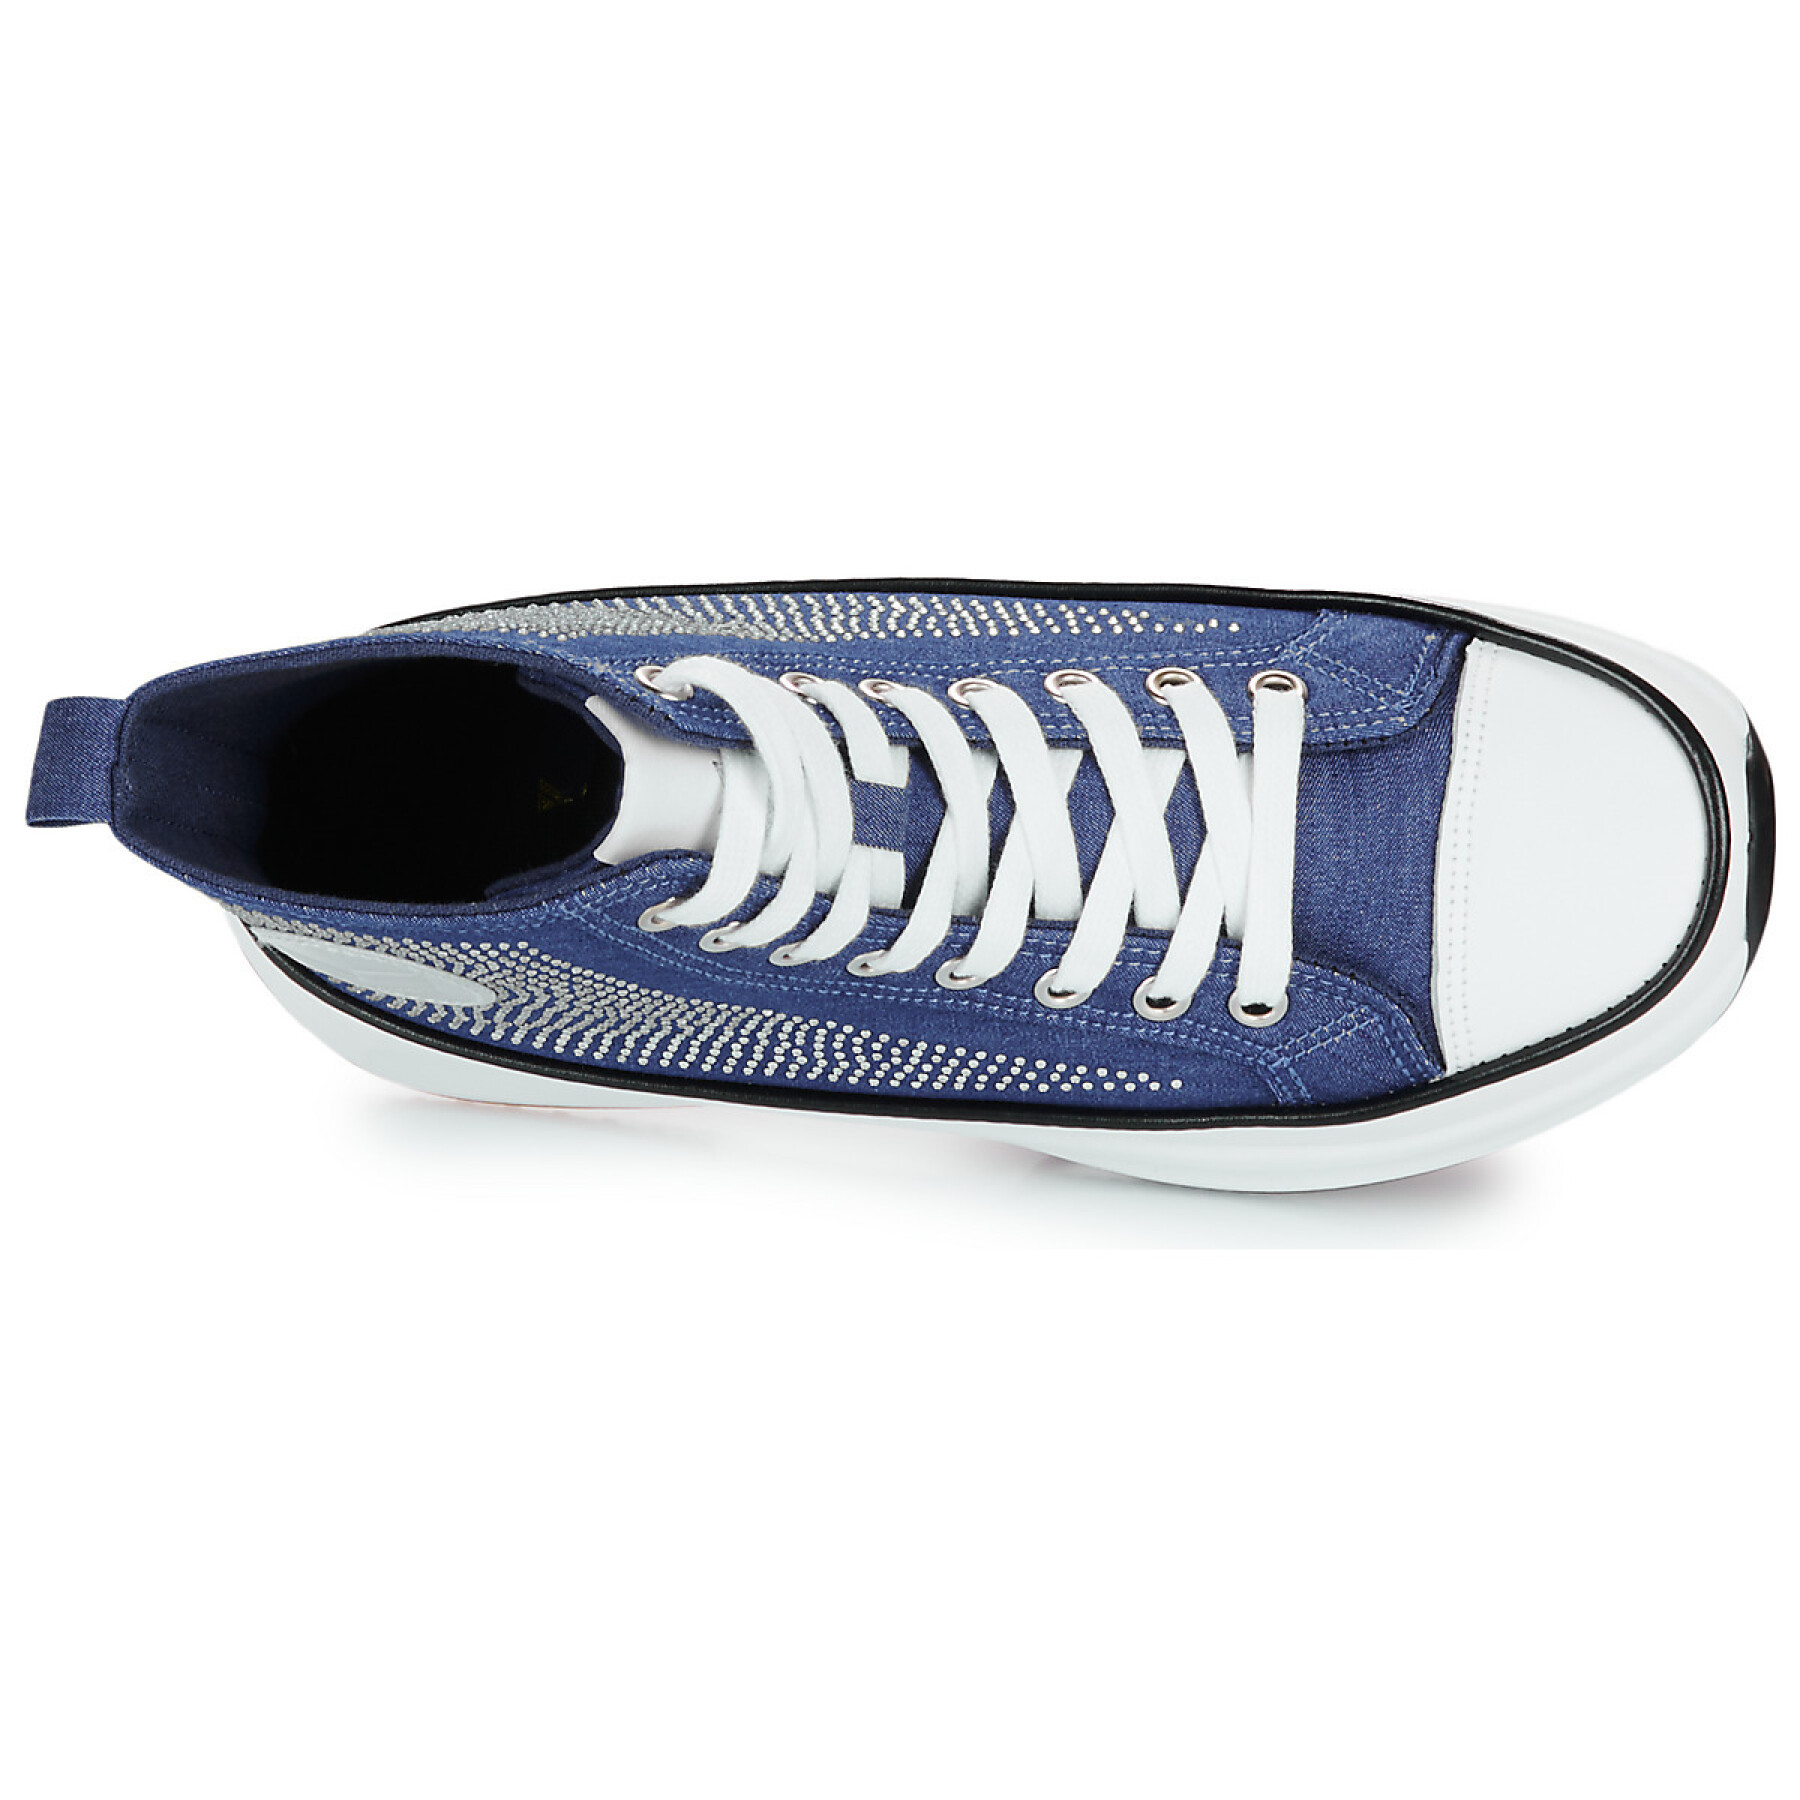 Women's casual sneakers Kaporal Christa